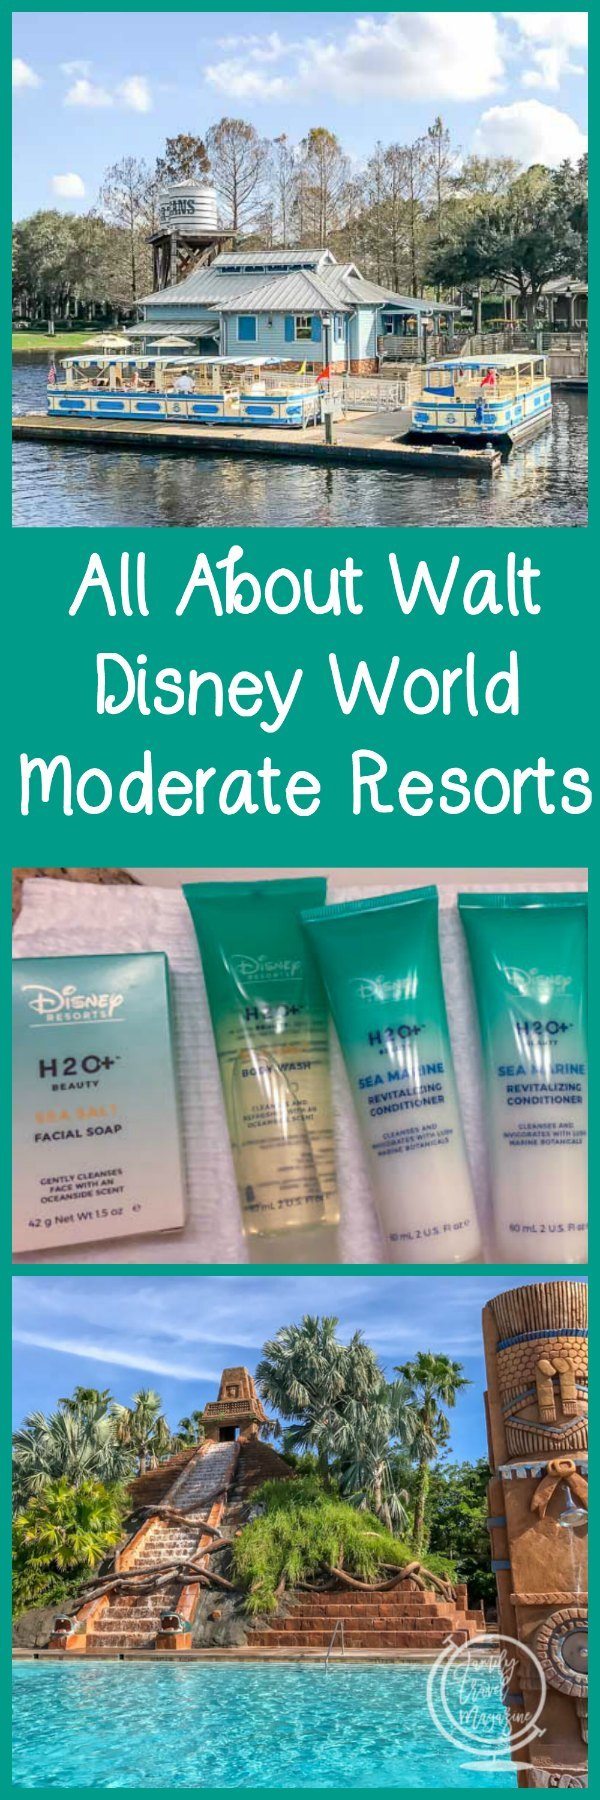 All about Disney Moderate Resorts, including the amenities and transportation they offer. 